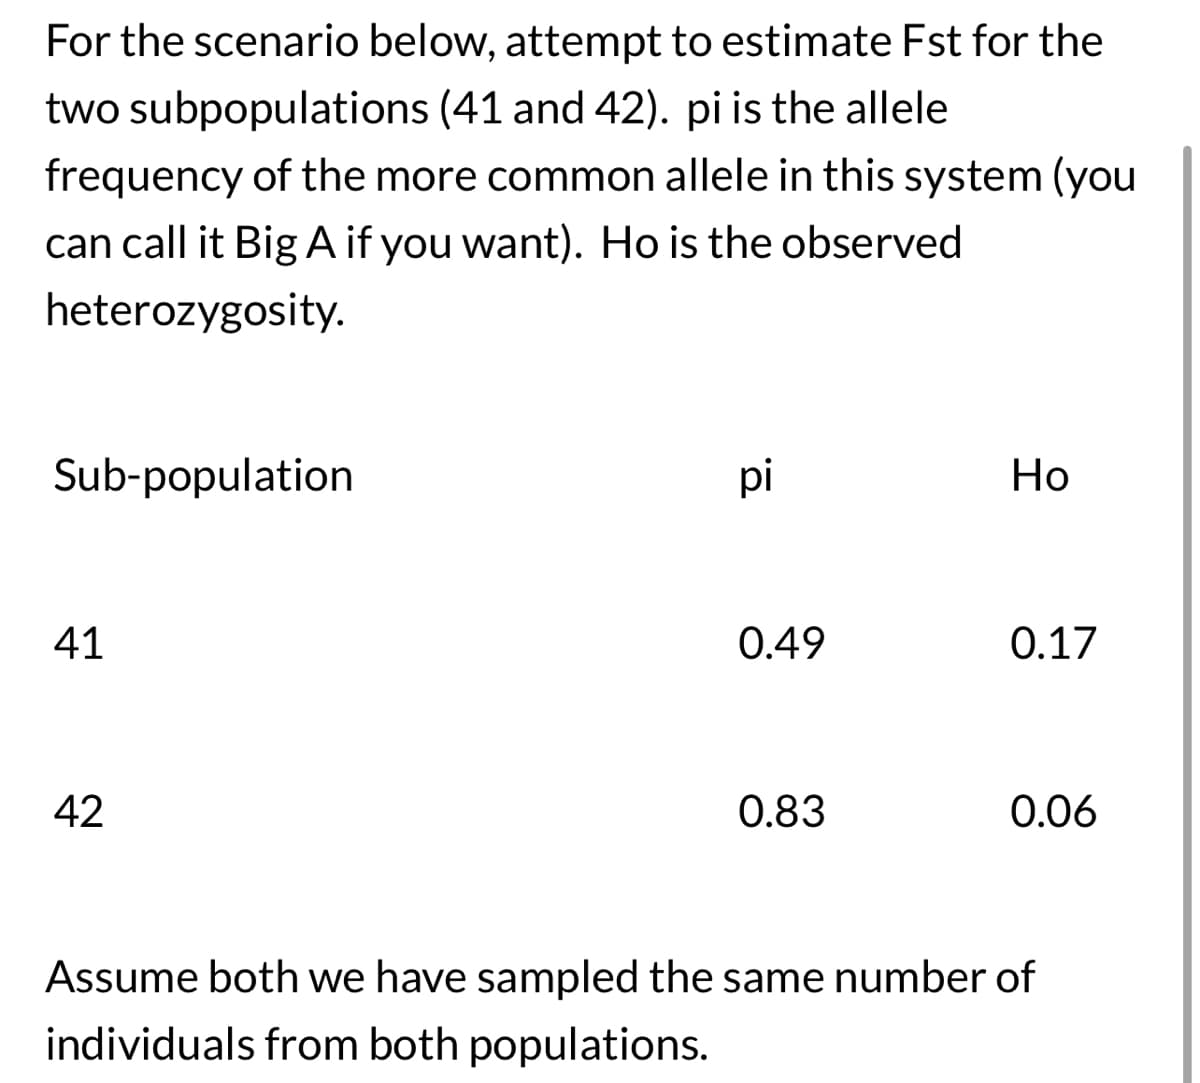 For the scenario below, attempt to estimate Fst for the
two subpopulations (41 and 42). pi is the allele
frequency of the more common allele in this system (you
can call it Big A if you want). Ho is the observed
heterozygosity.
Sub-population
41
42
pi
0.49
0.83
Но
0.17
0.06
Assume both we have sampled the same number of
individuals from both populations.